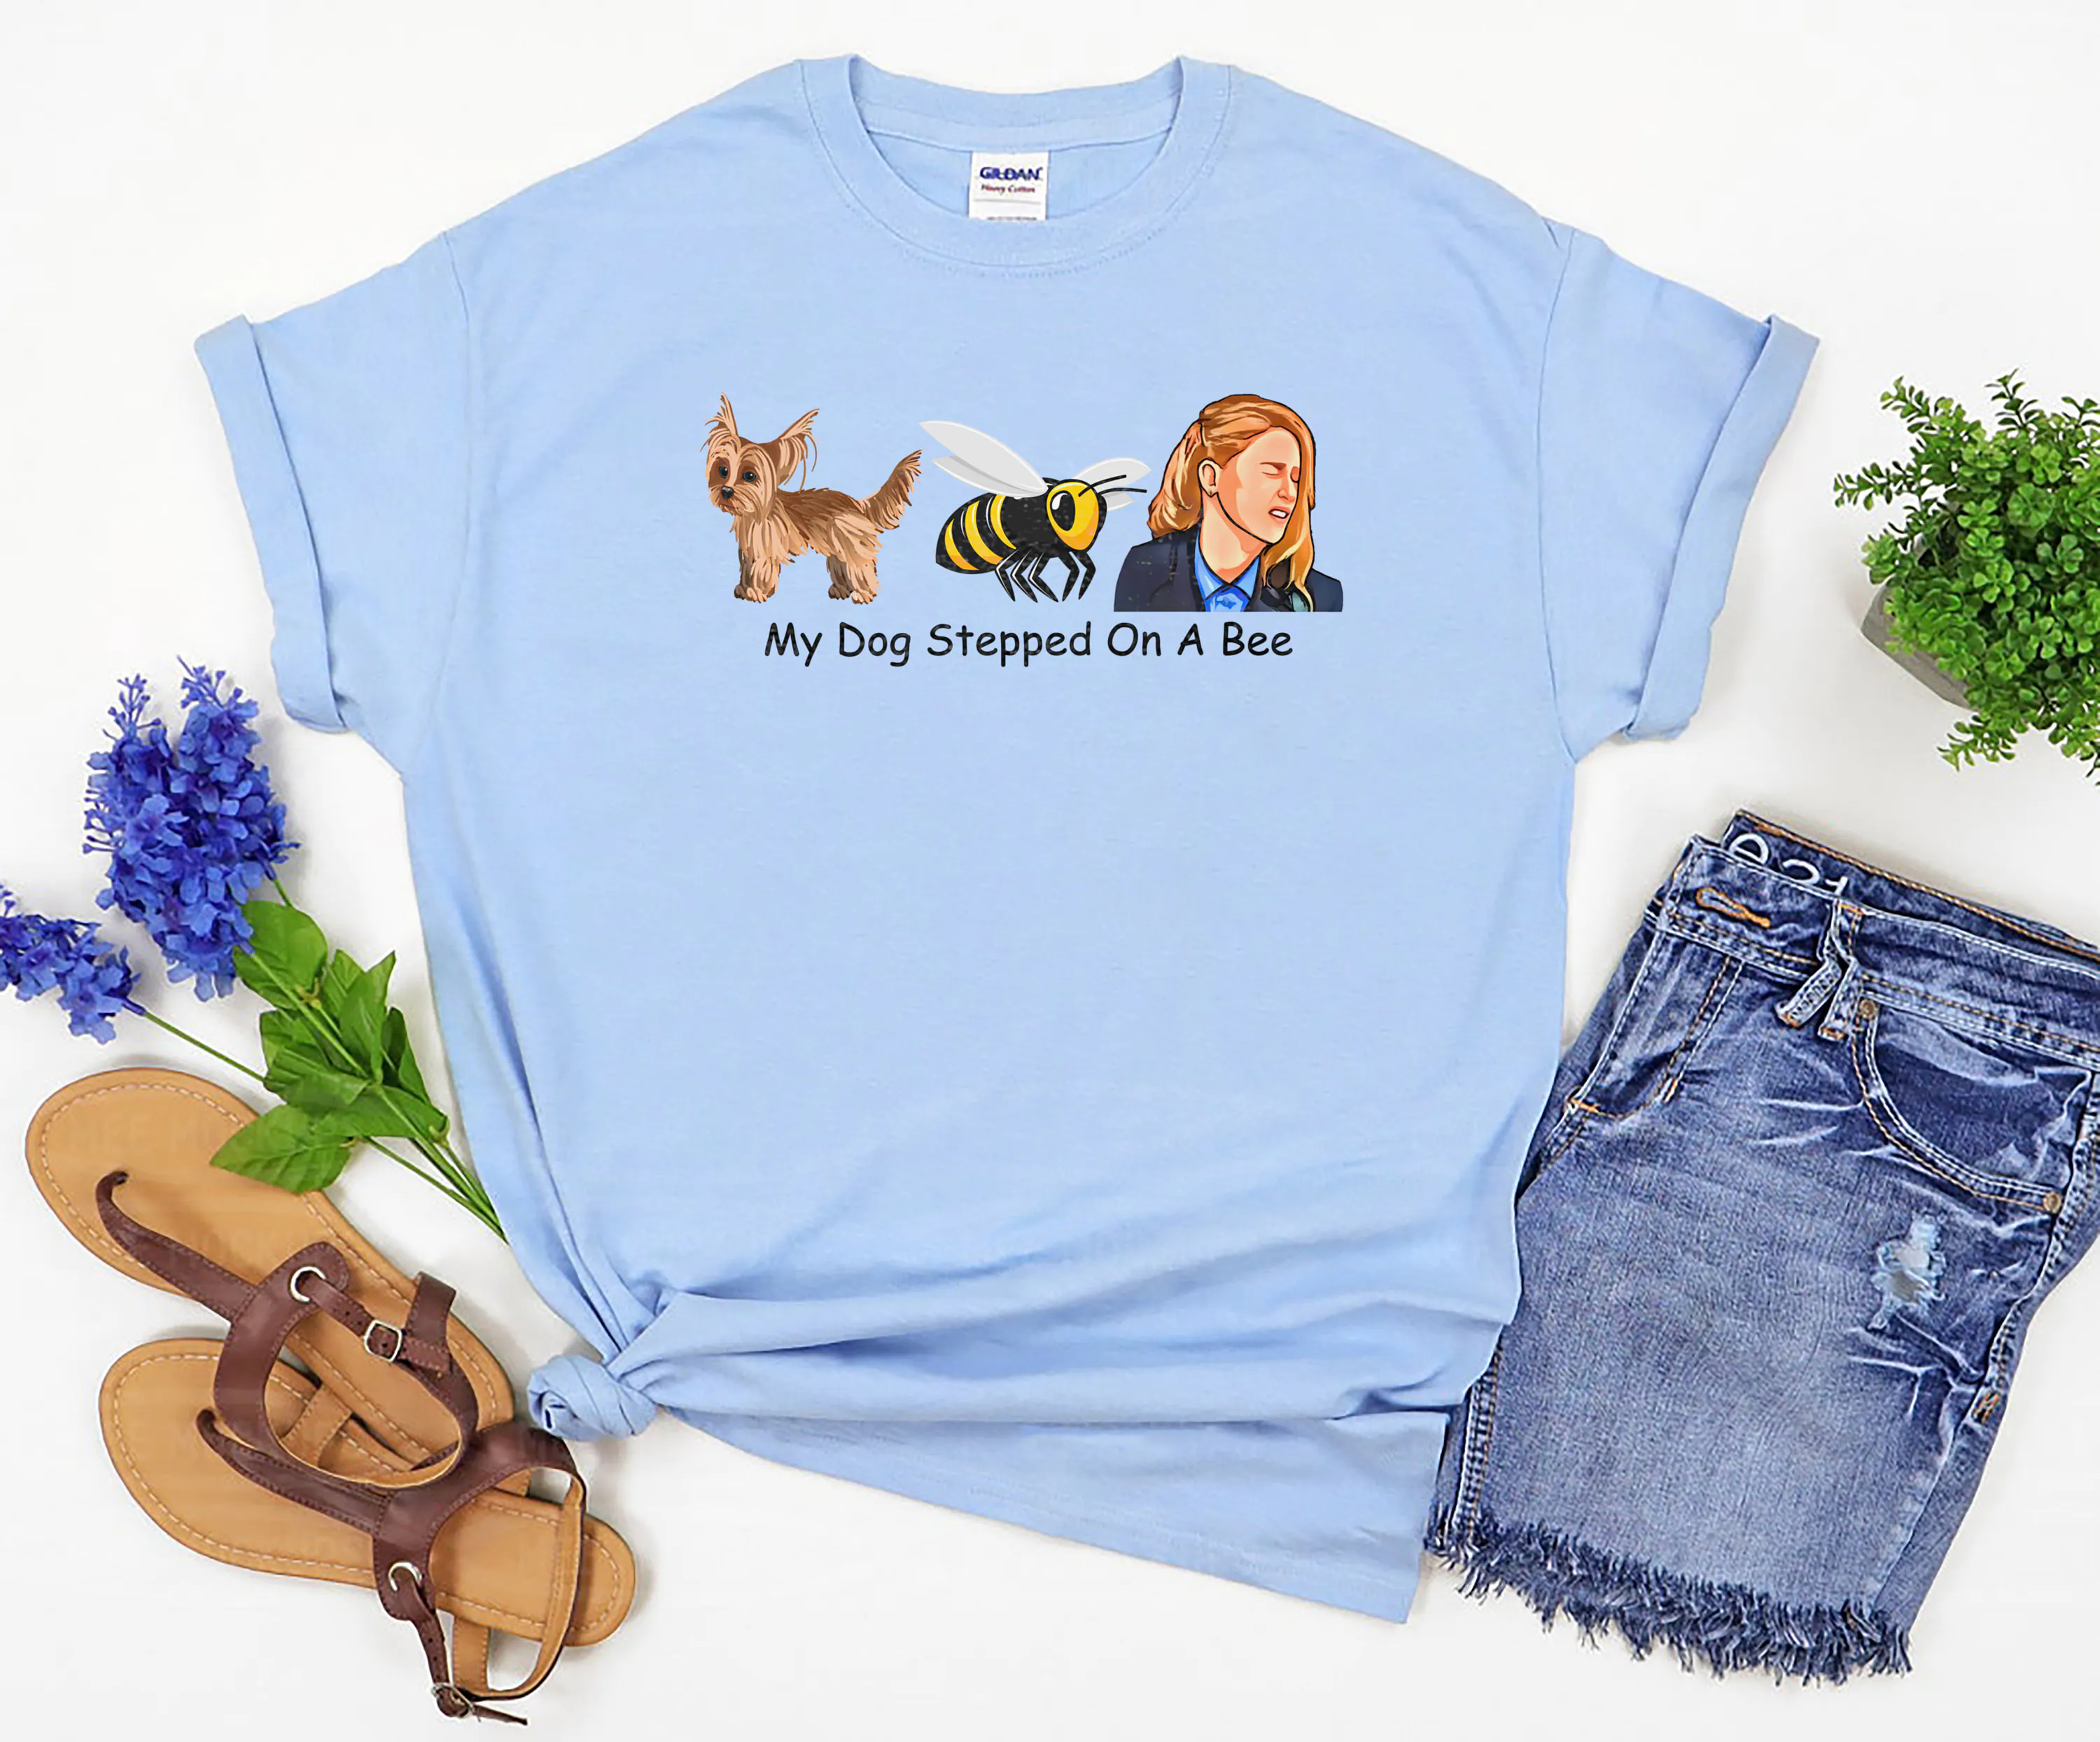 My Dog Stepped On A Bee Amber Heard Said Justice For Johnny Depp Unisex  T-Shirt – Teepital – Everyday New Aesthetic Designs